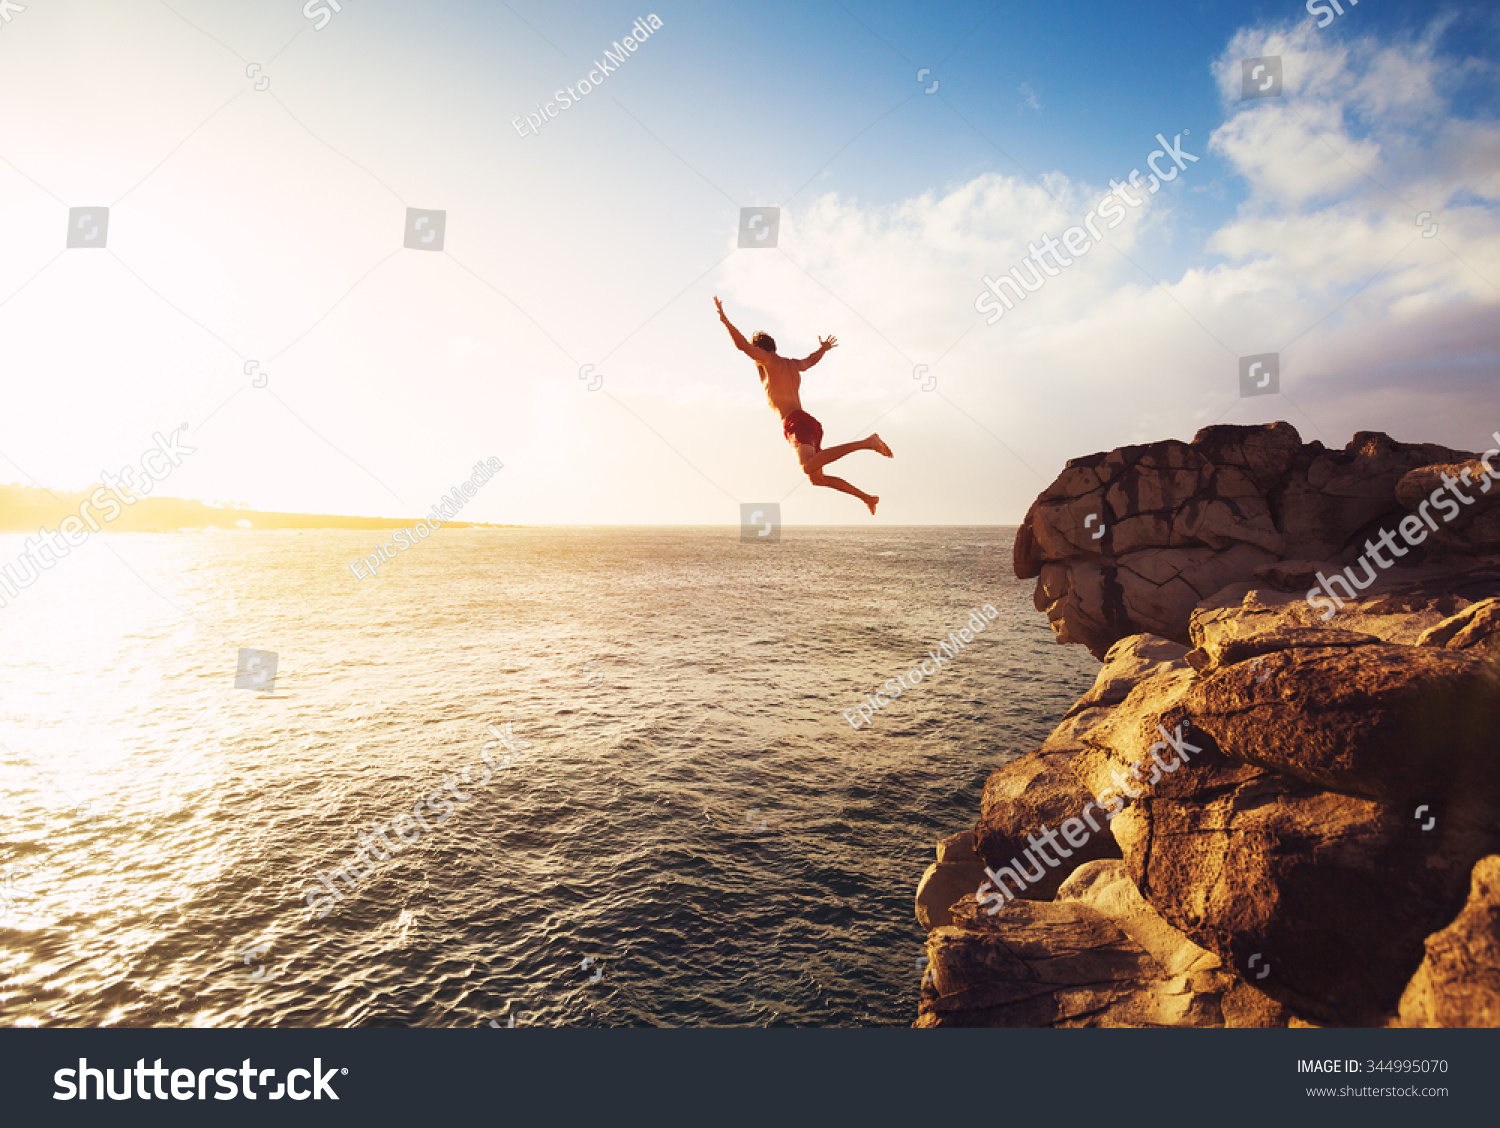 Cliff Jumping into the Ocean at Sunset, Summer Fun Lifestyle #344995070